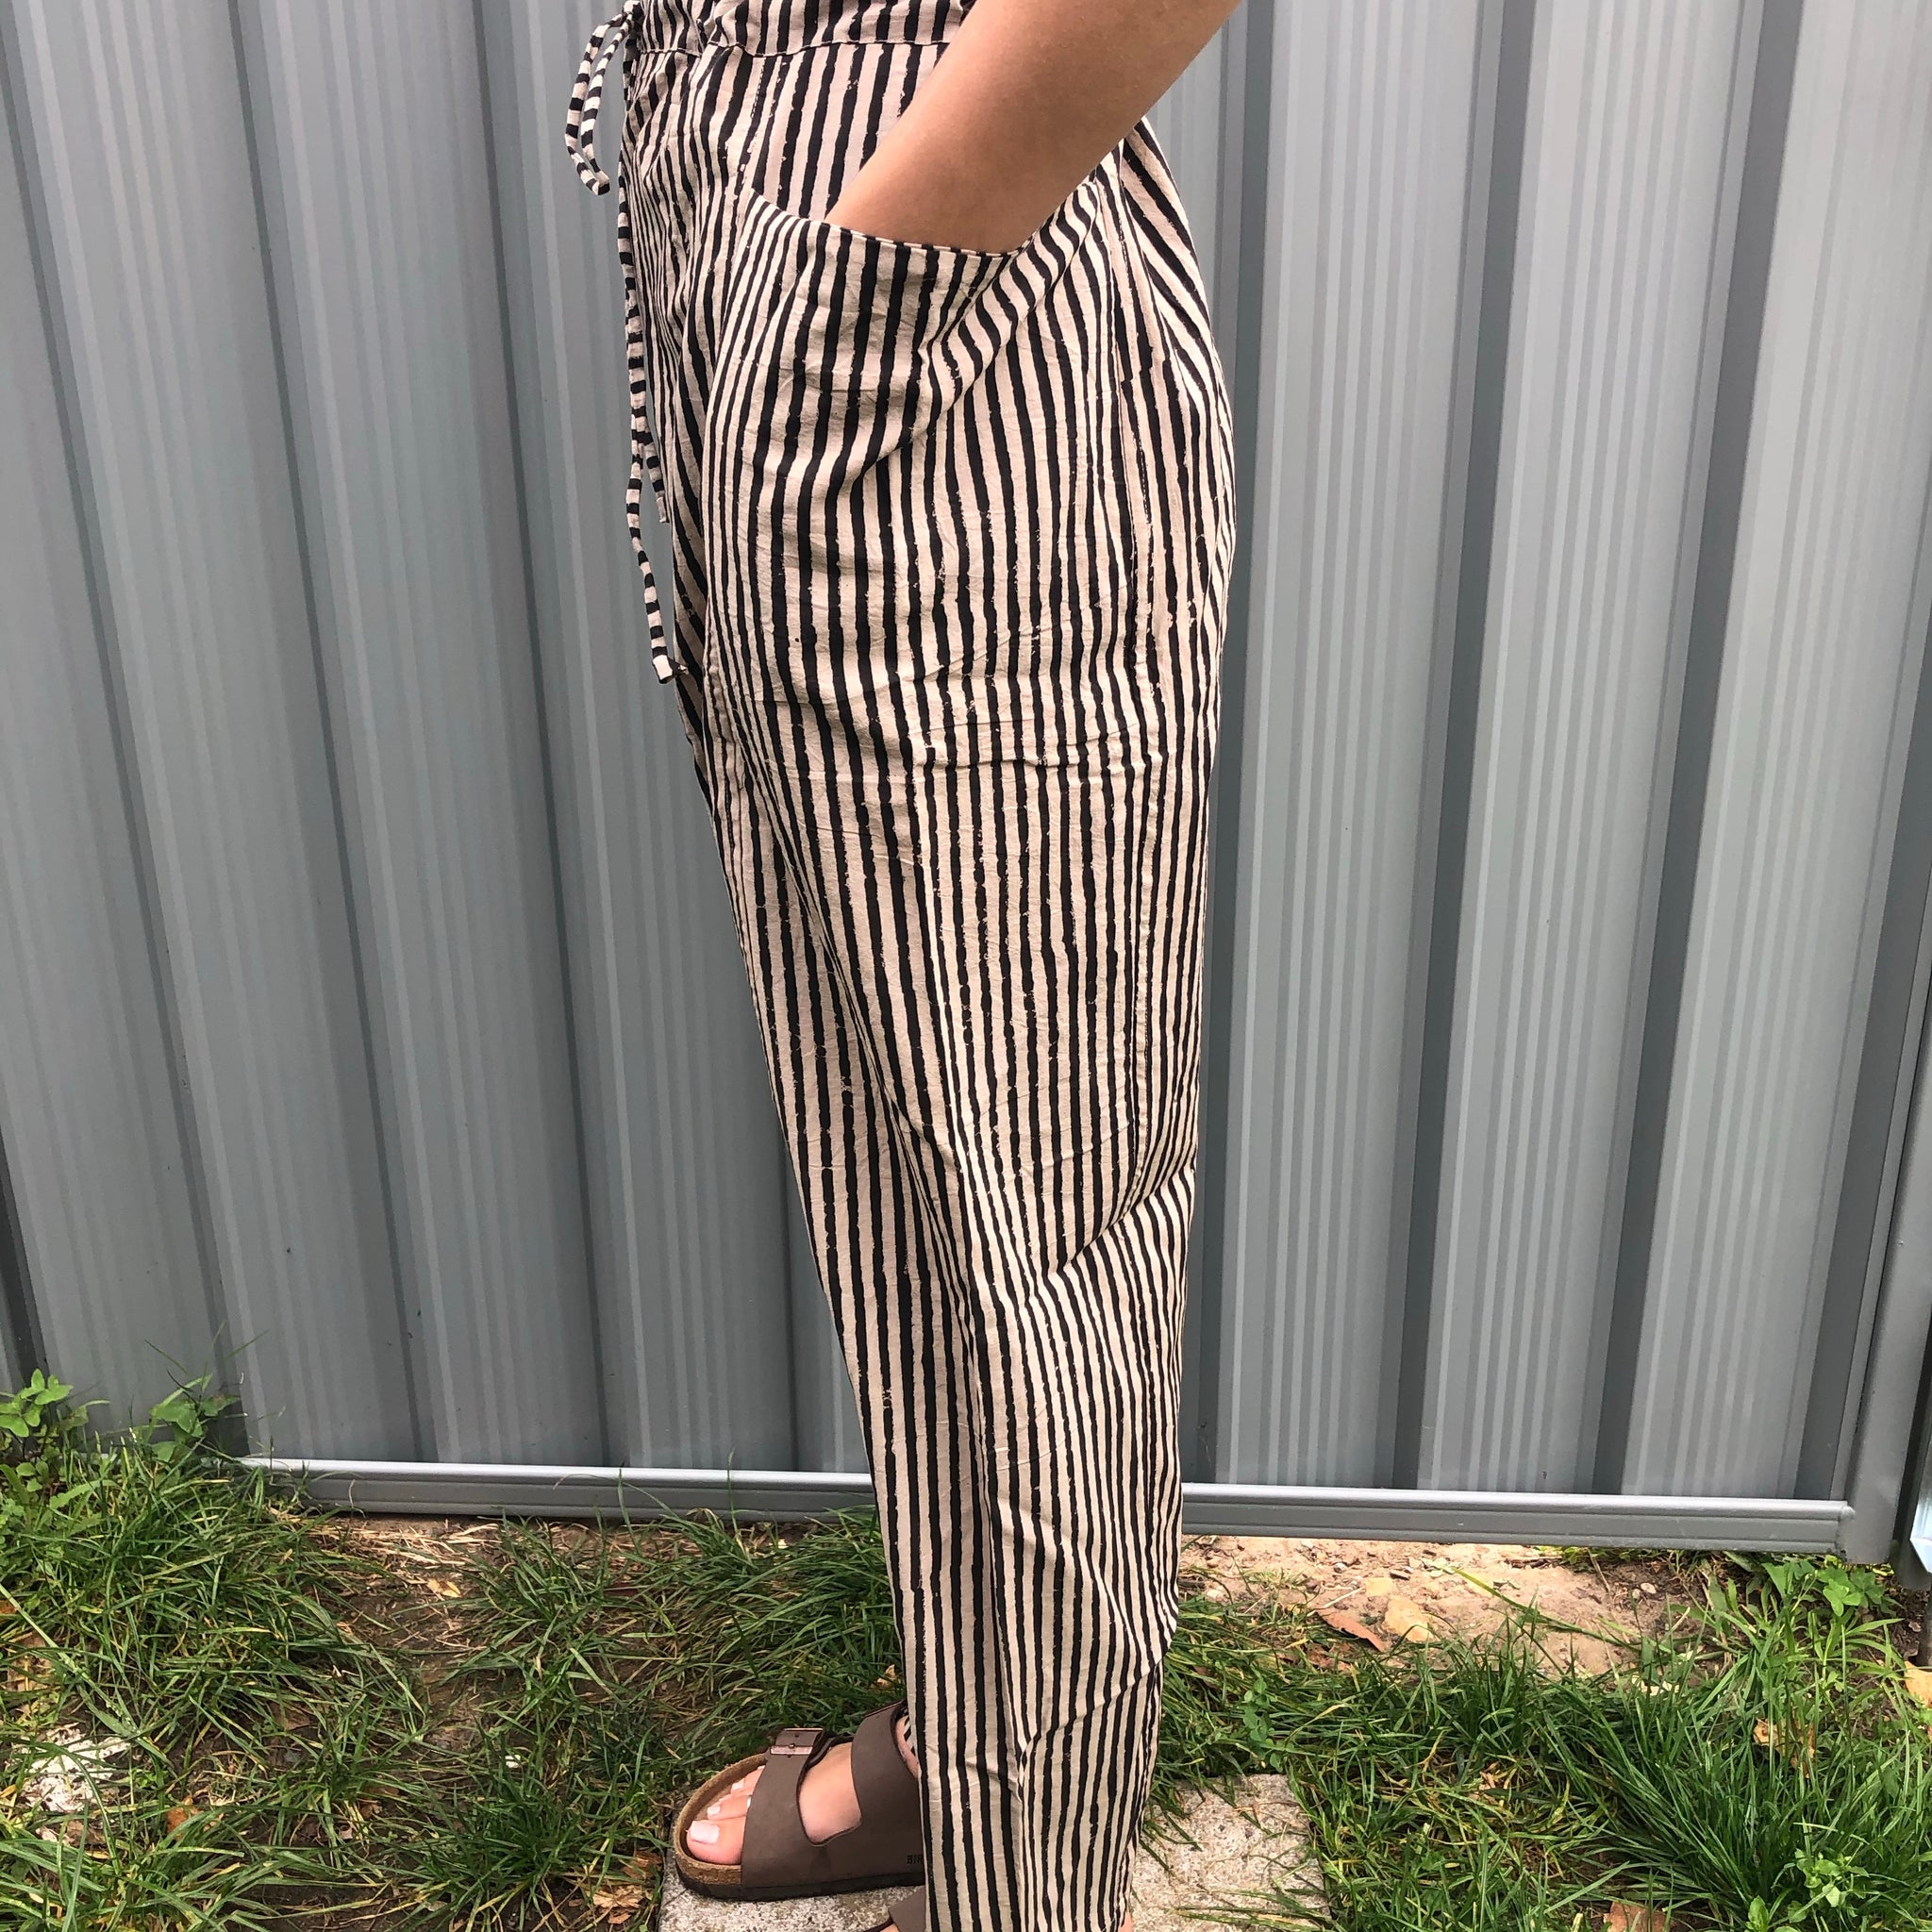 Fair Trade Ethical Striped Cotton Pants in Black